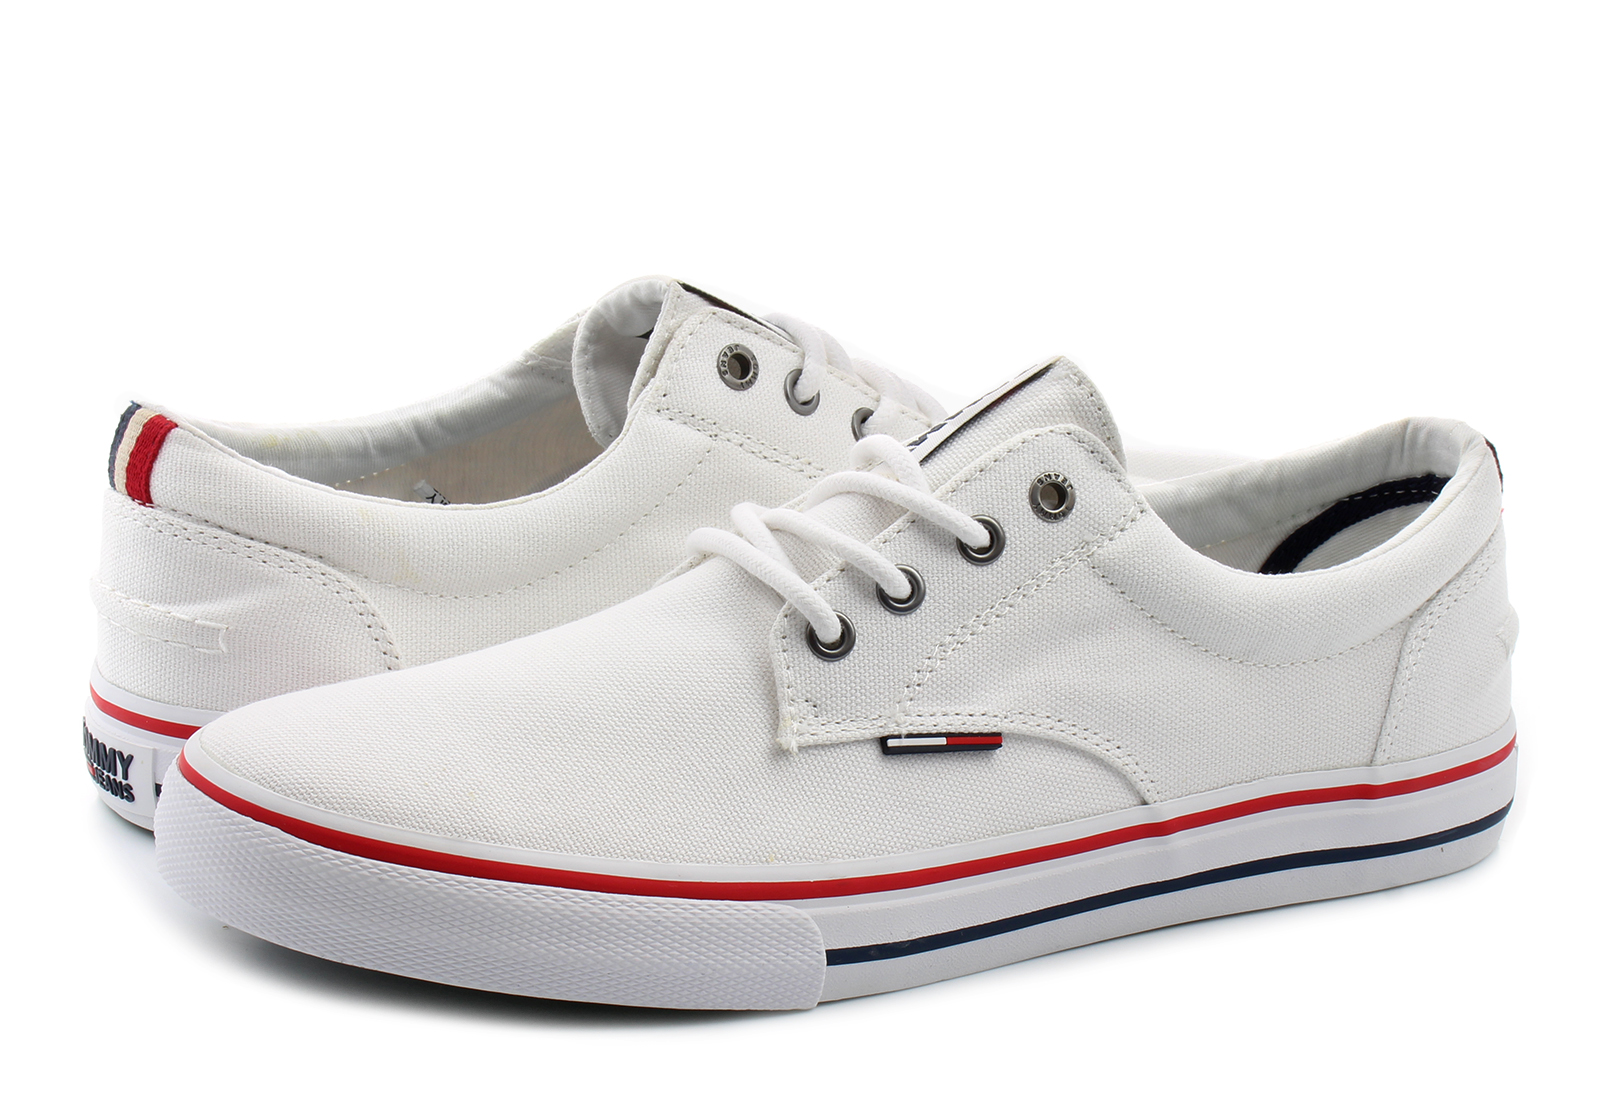 Demonstrate funnel lilac Tommy Hilfiger Sneakers - Vic 1d2 - 18S-0001-100 - Office Shoes Romania